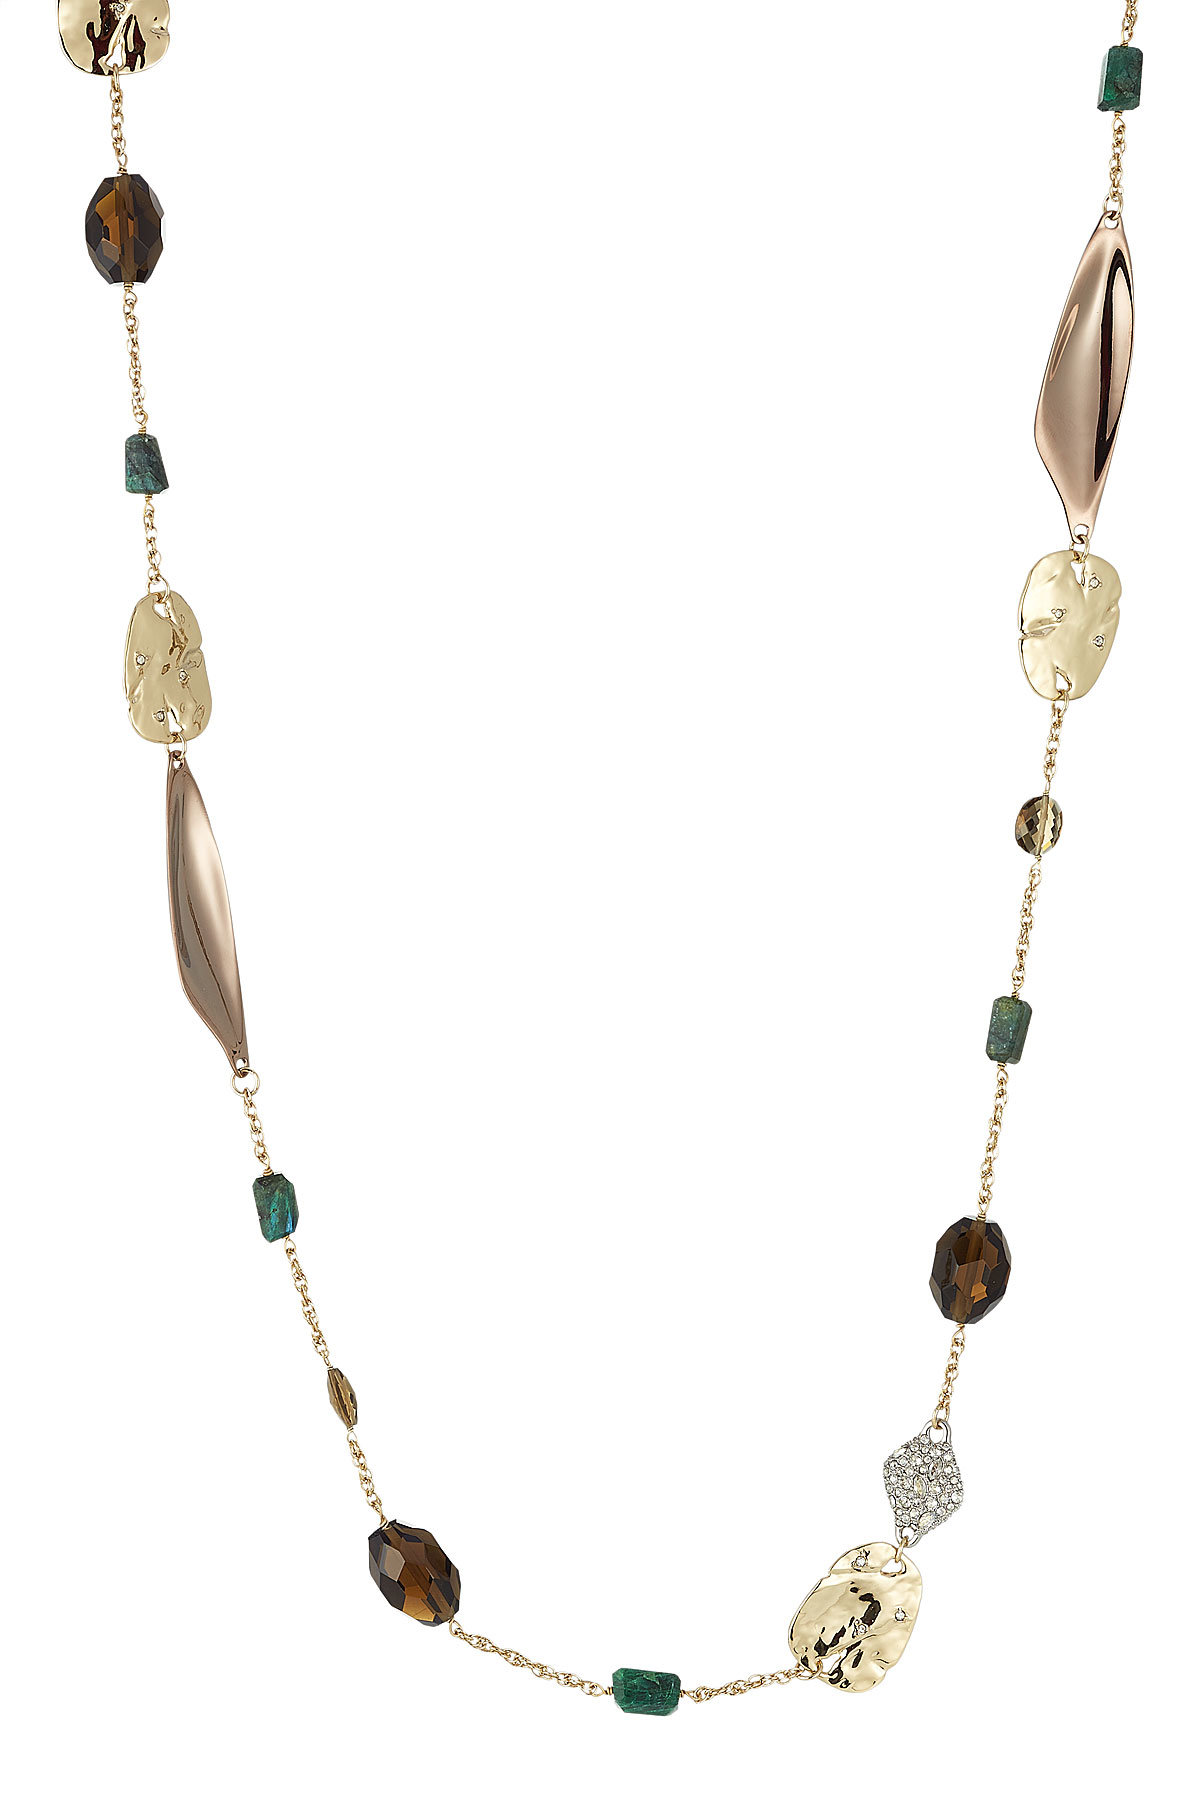 10kt Gold Necklace with Pyrite and Crystals by Alexis Bittar